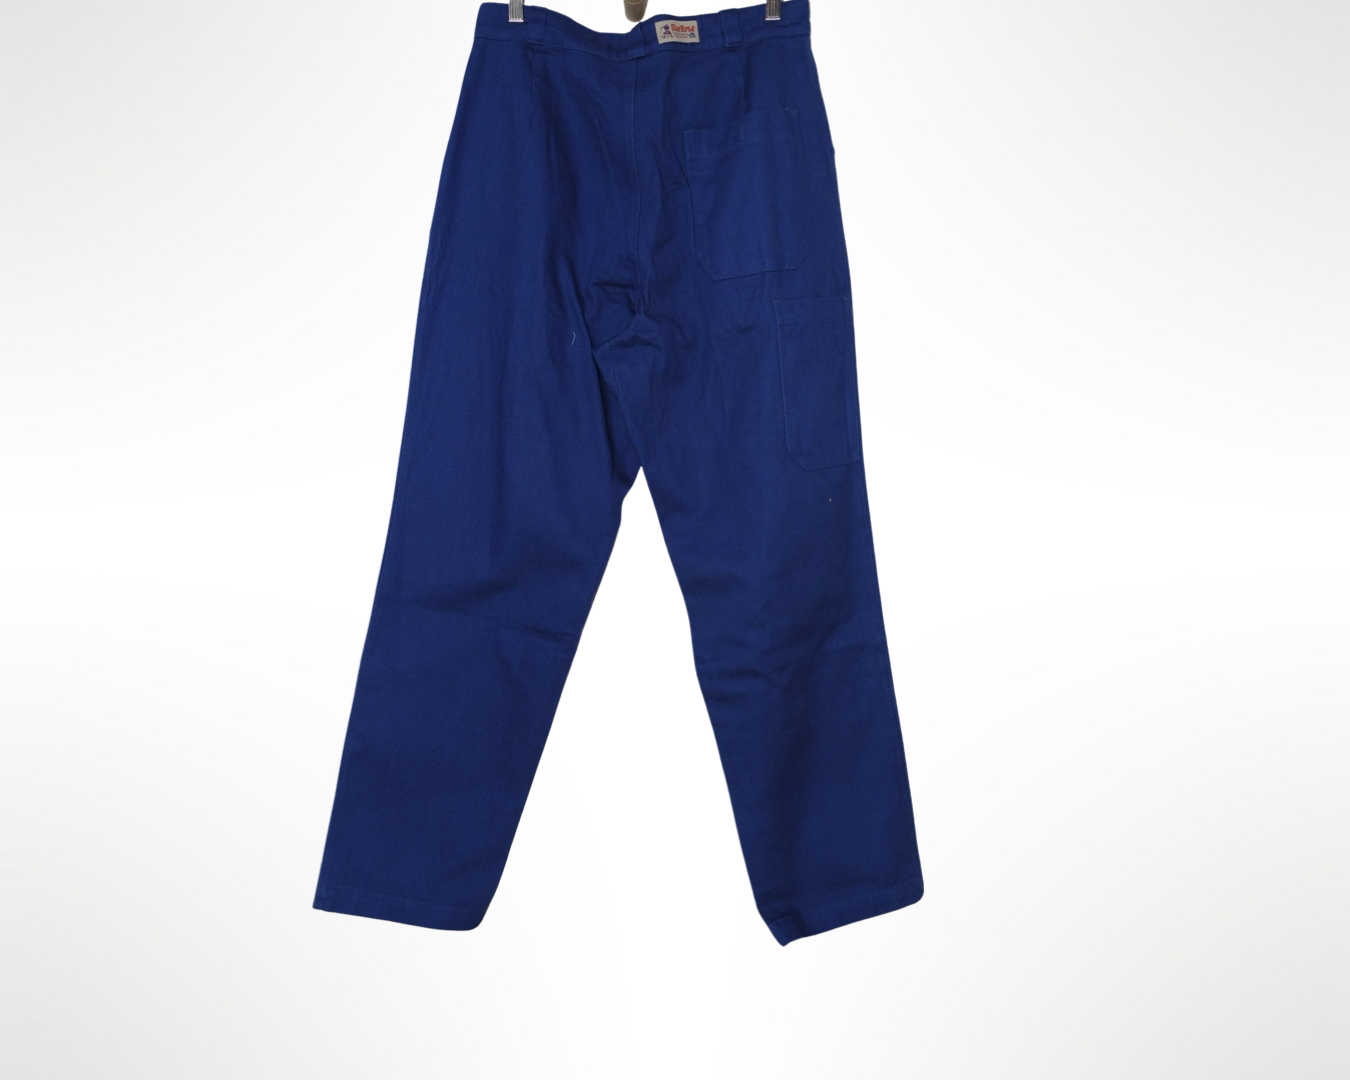 twill chore pants in cobalt